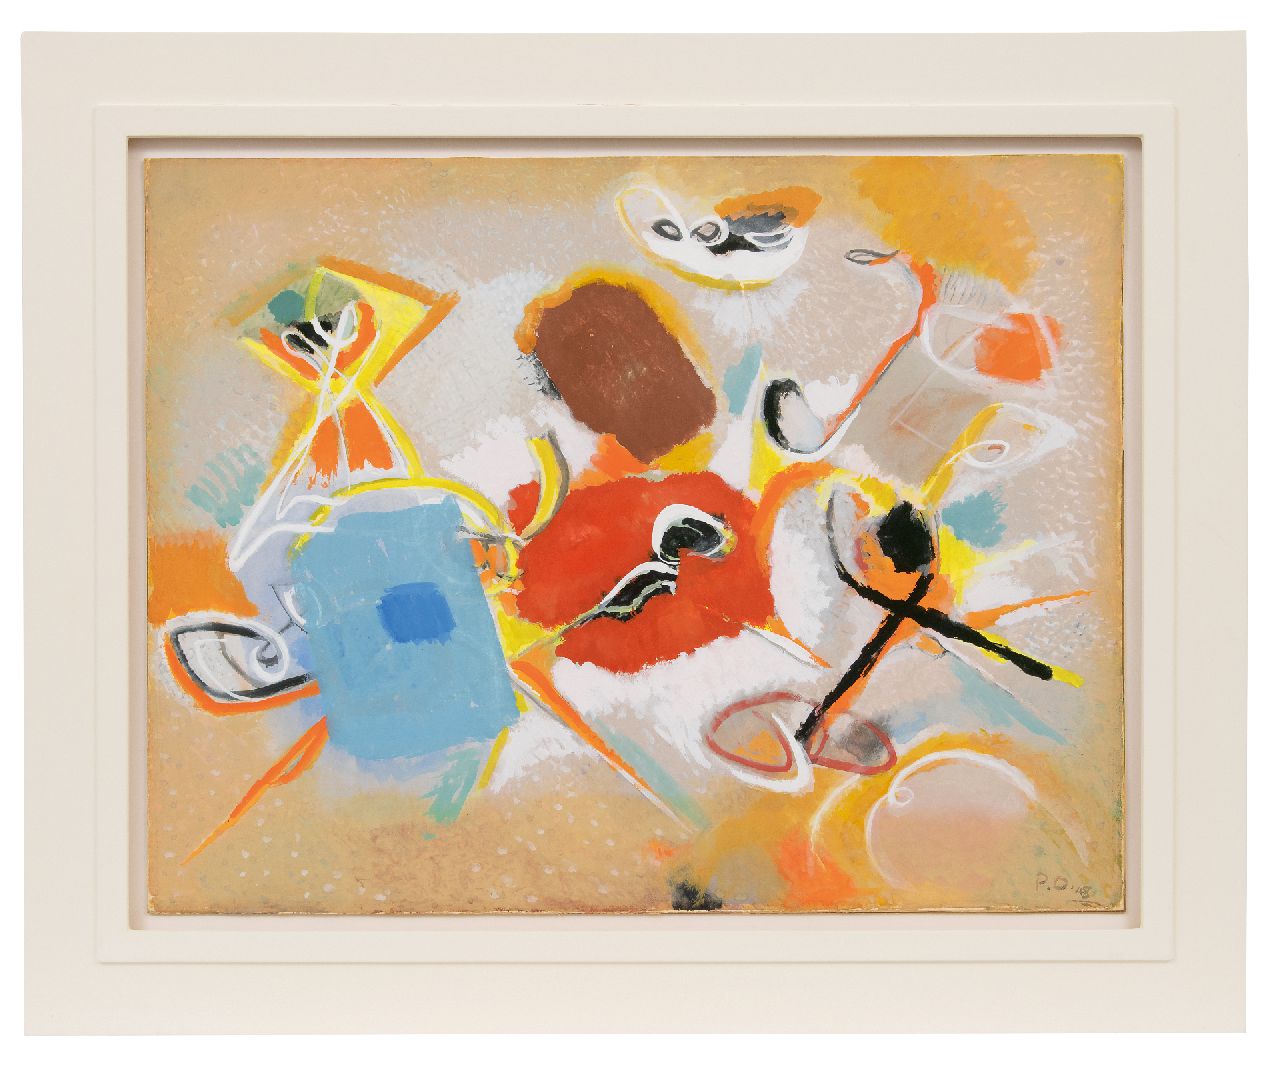 Ouborg P.  | Pieter 'Piet' Ouborg | Watercolours and drawings offered for sale | In heftige beweging (In Violent Motion), gouache on paper laid down on board 50.5 x 65.1 cm, signed l.r. with initials and dated '48